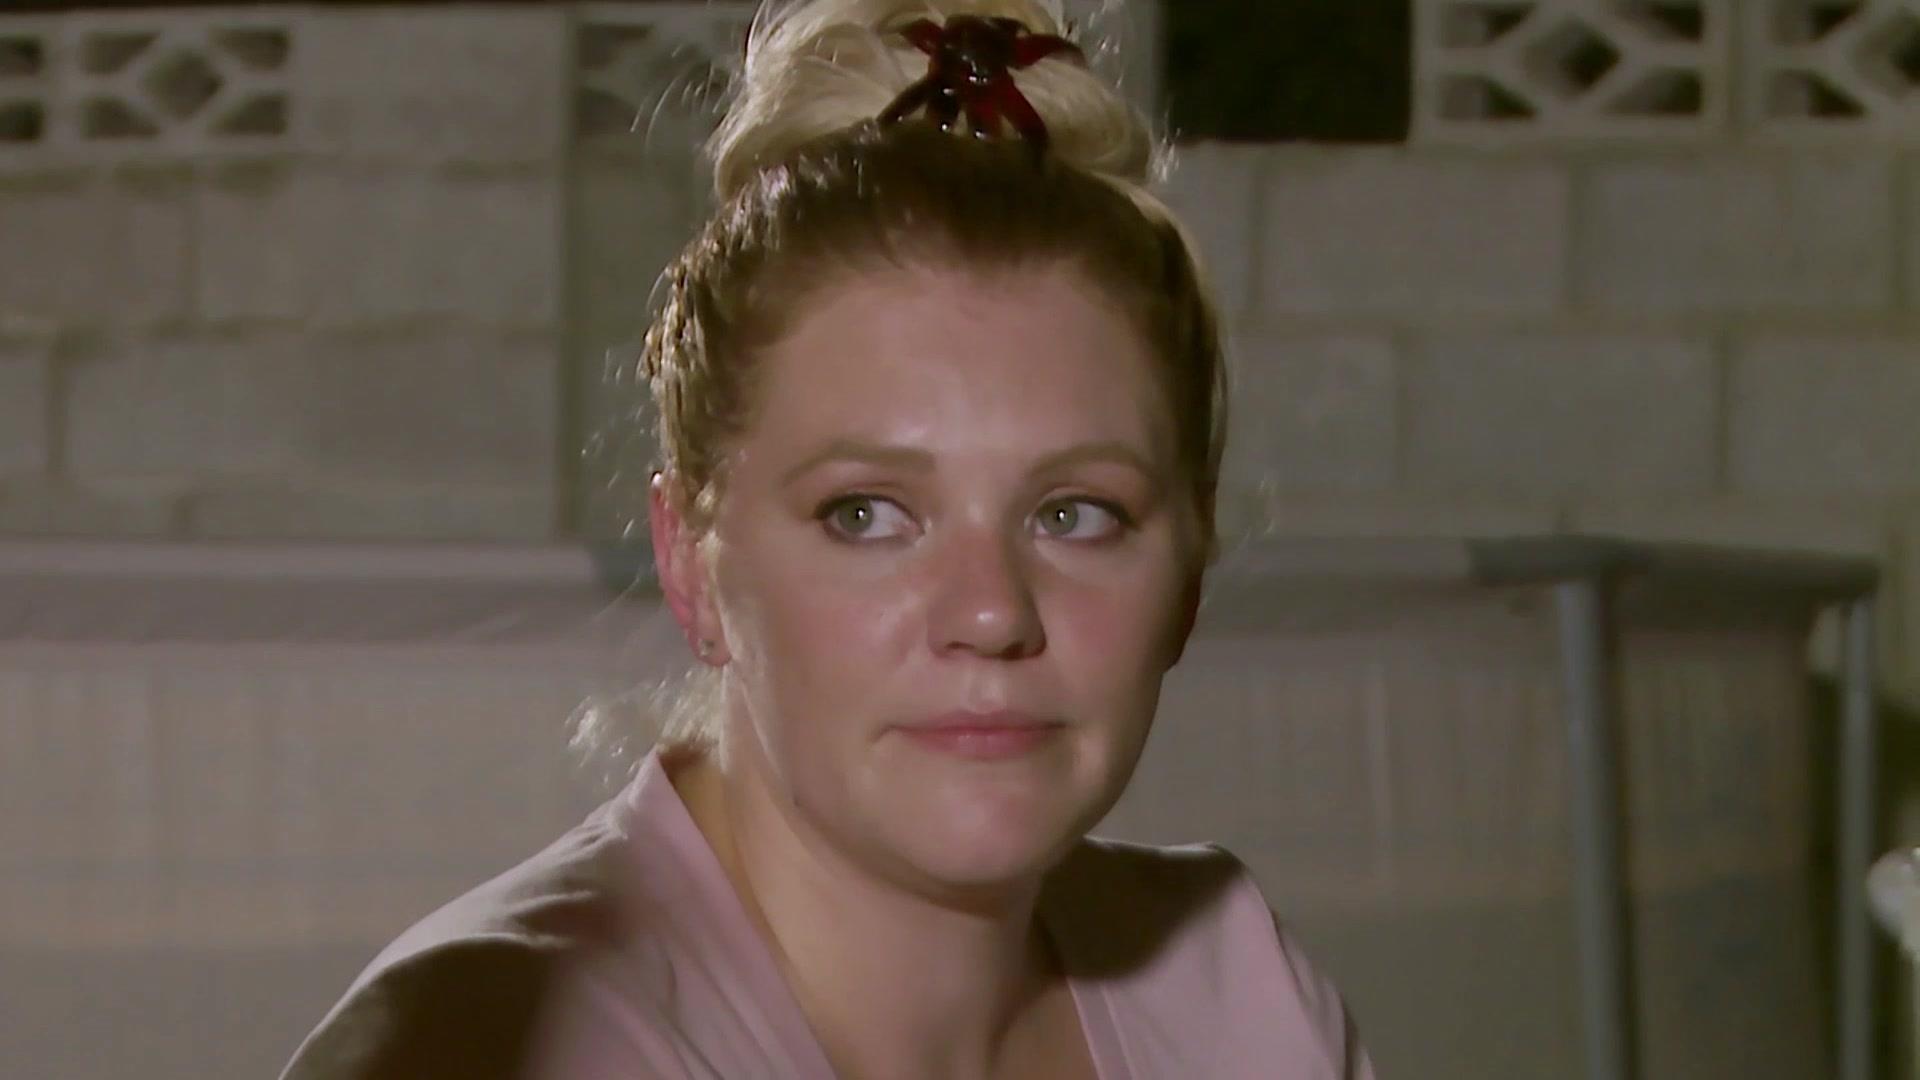 Watch Where Does Brittany Go From Here? | Life After Lockup Video Extras